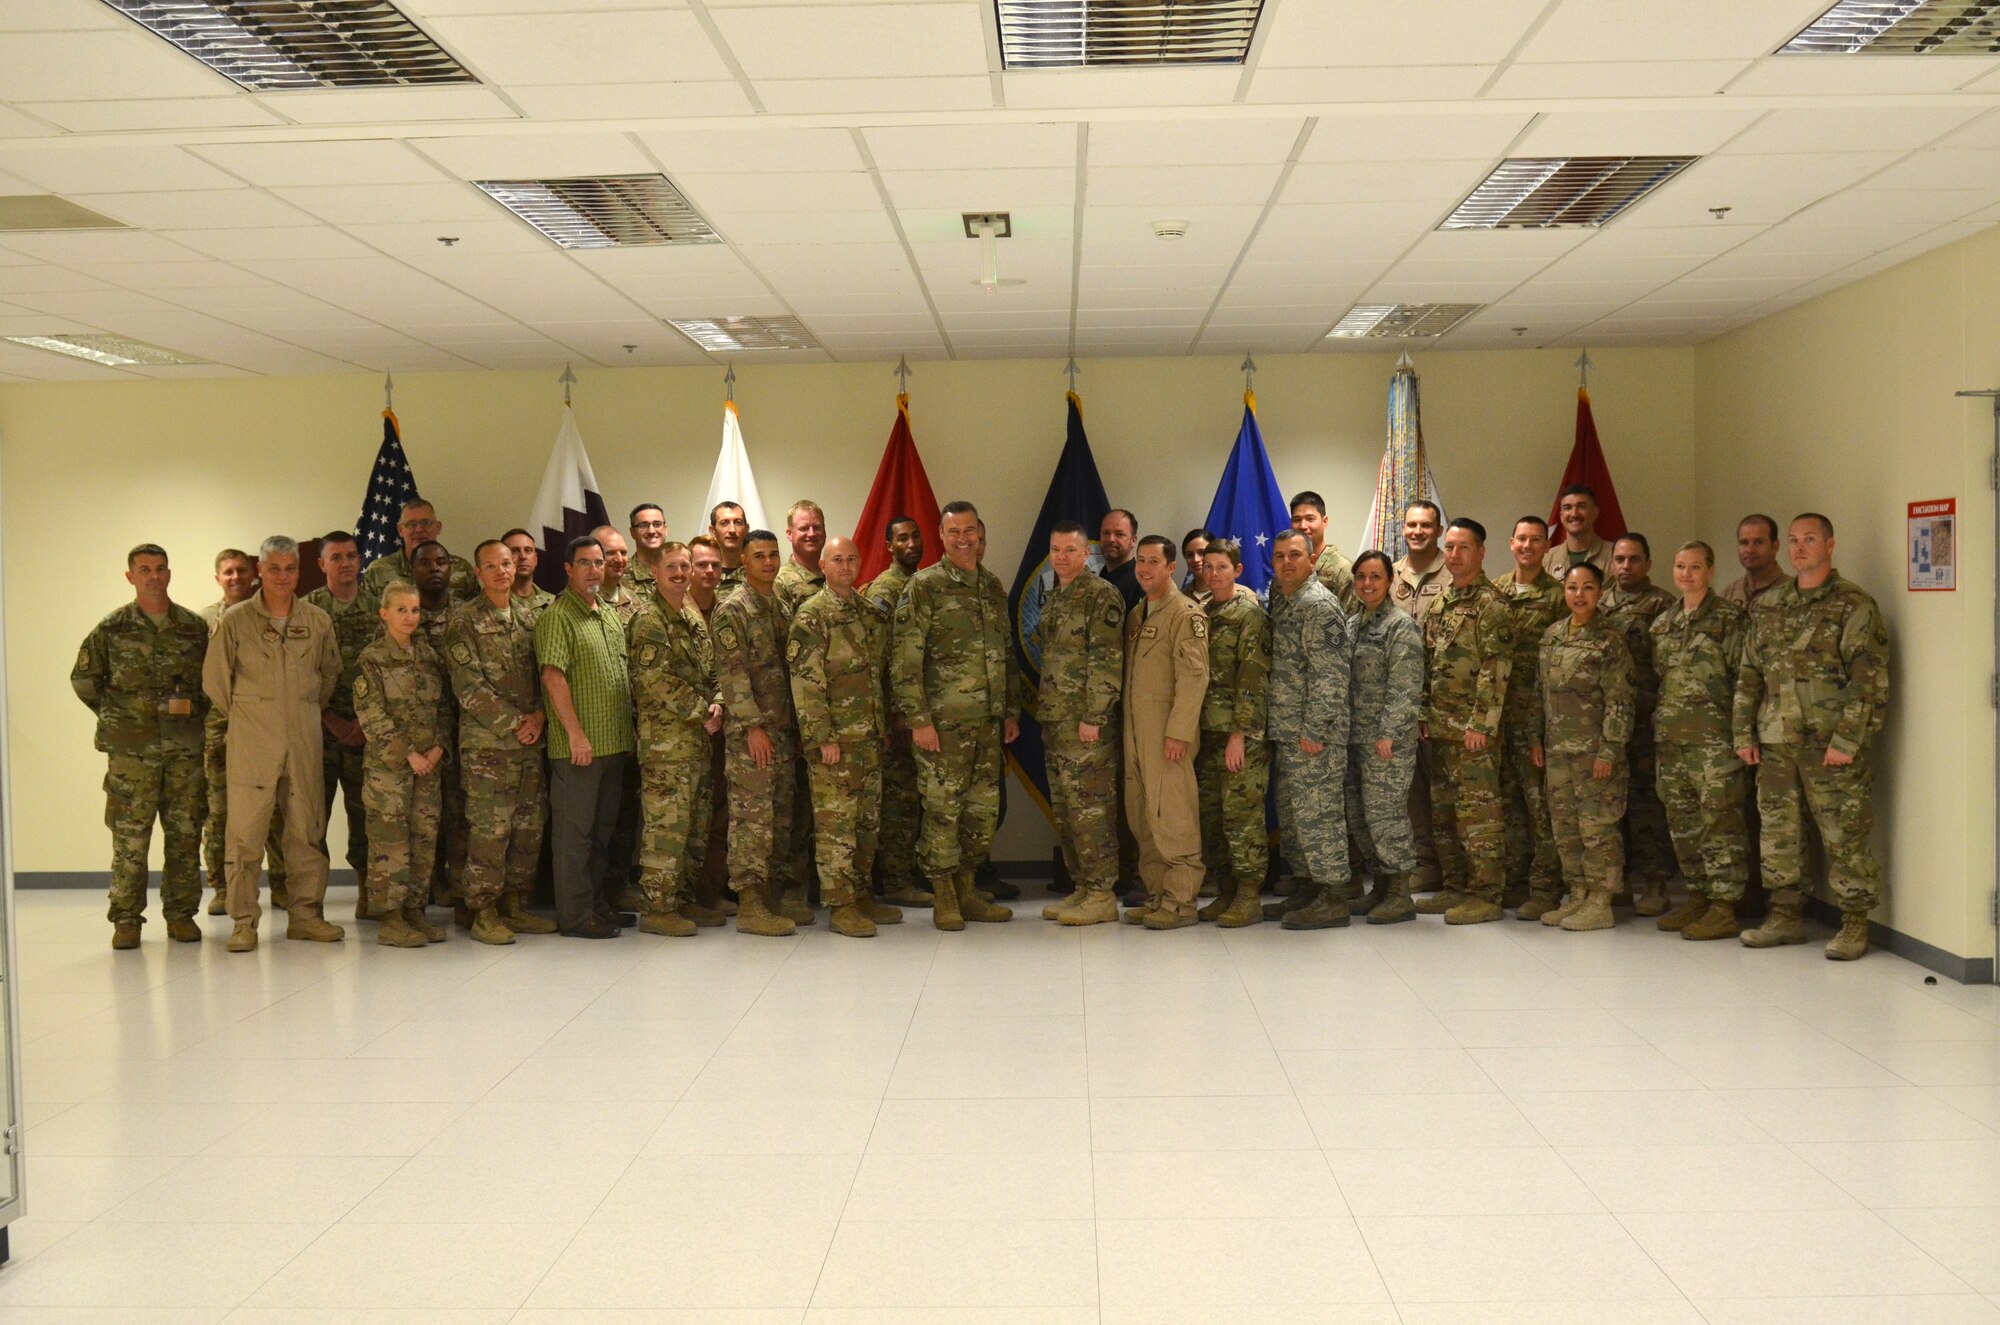 Air Chiefs of Safety Conference attendees pose for a group photograph, Sept. 6, 2018, at Al Udeid Air Base, Qatar. This was the first time coalition members were invited to participate in the biannual conference to build networking opportunities, promote cross-talk and connect chiefs of safety within U.S. Air Forces Central Command. (U.S. Air Force photo by Staff Sgt. Caitlin Conner)